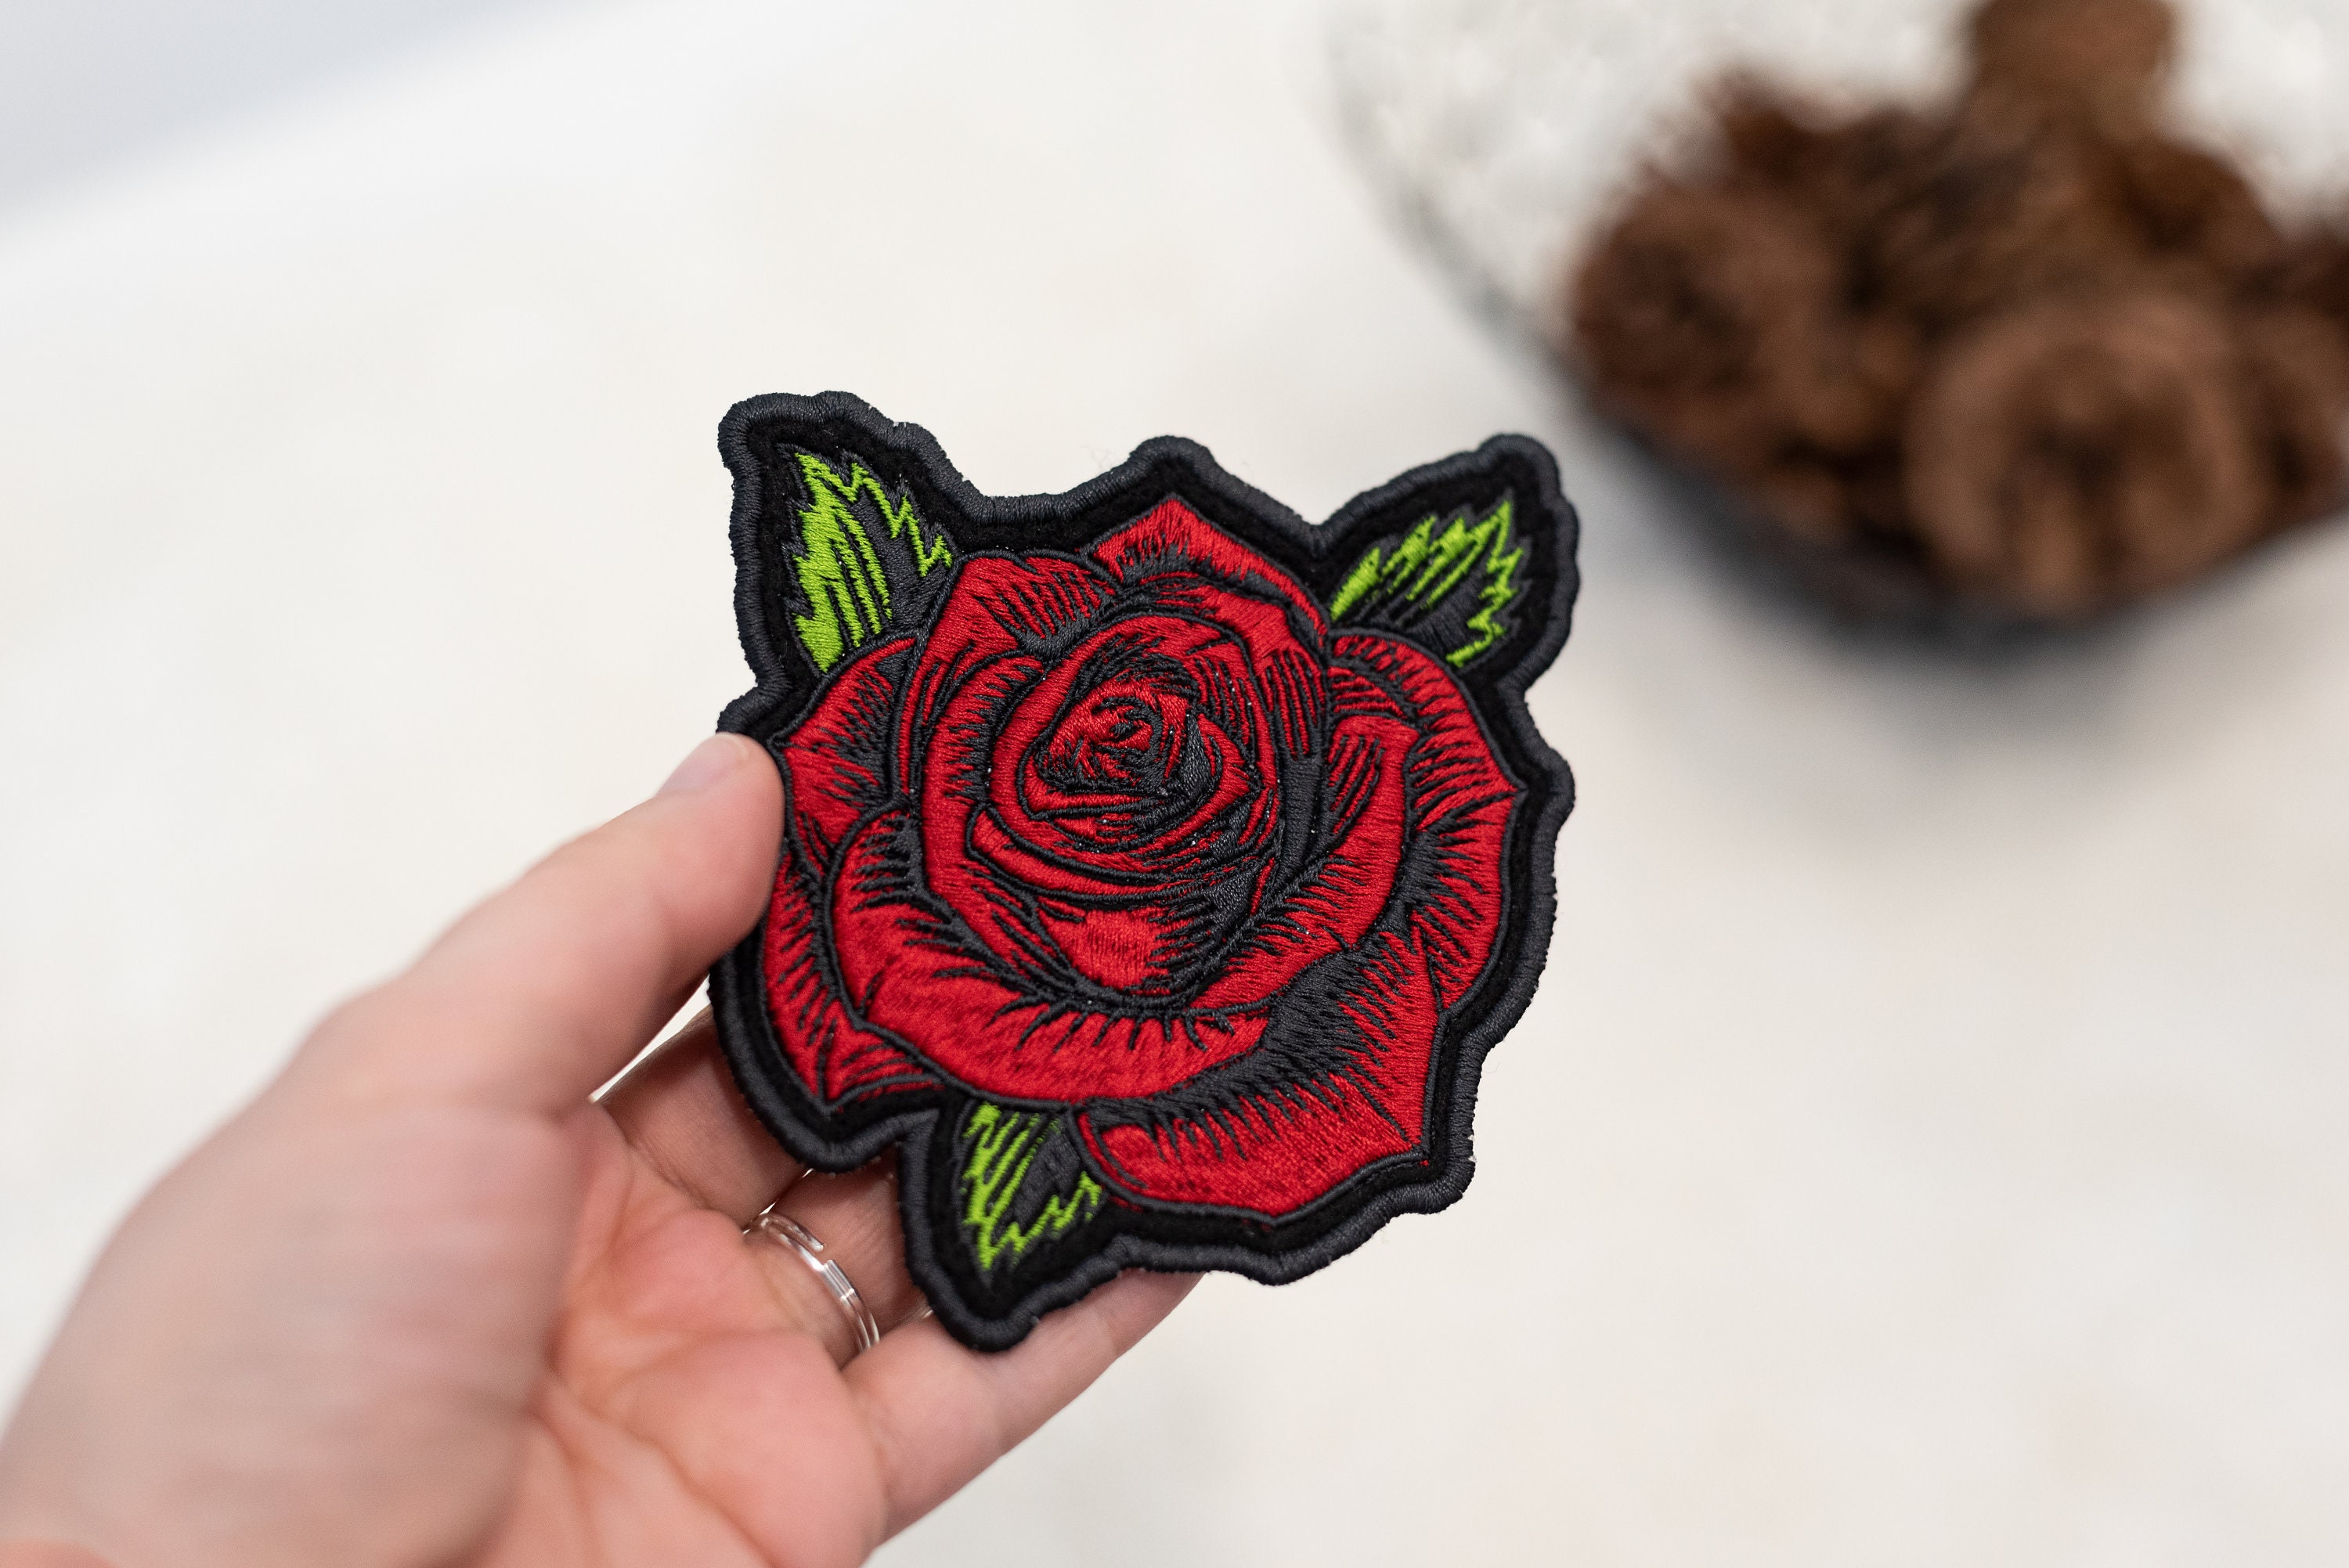 Rose Patches Clothing Lot, Patches Embroidered Red Rose